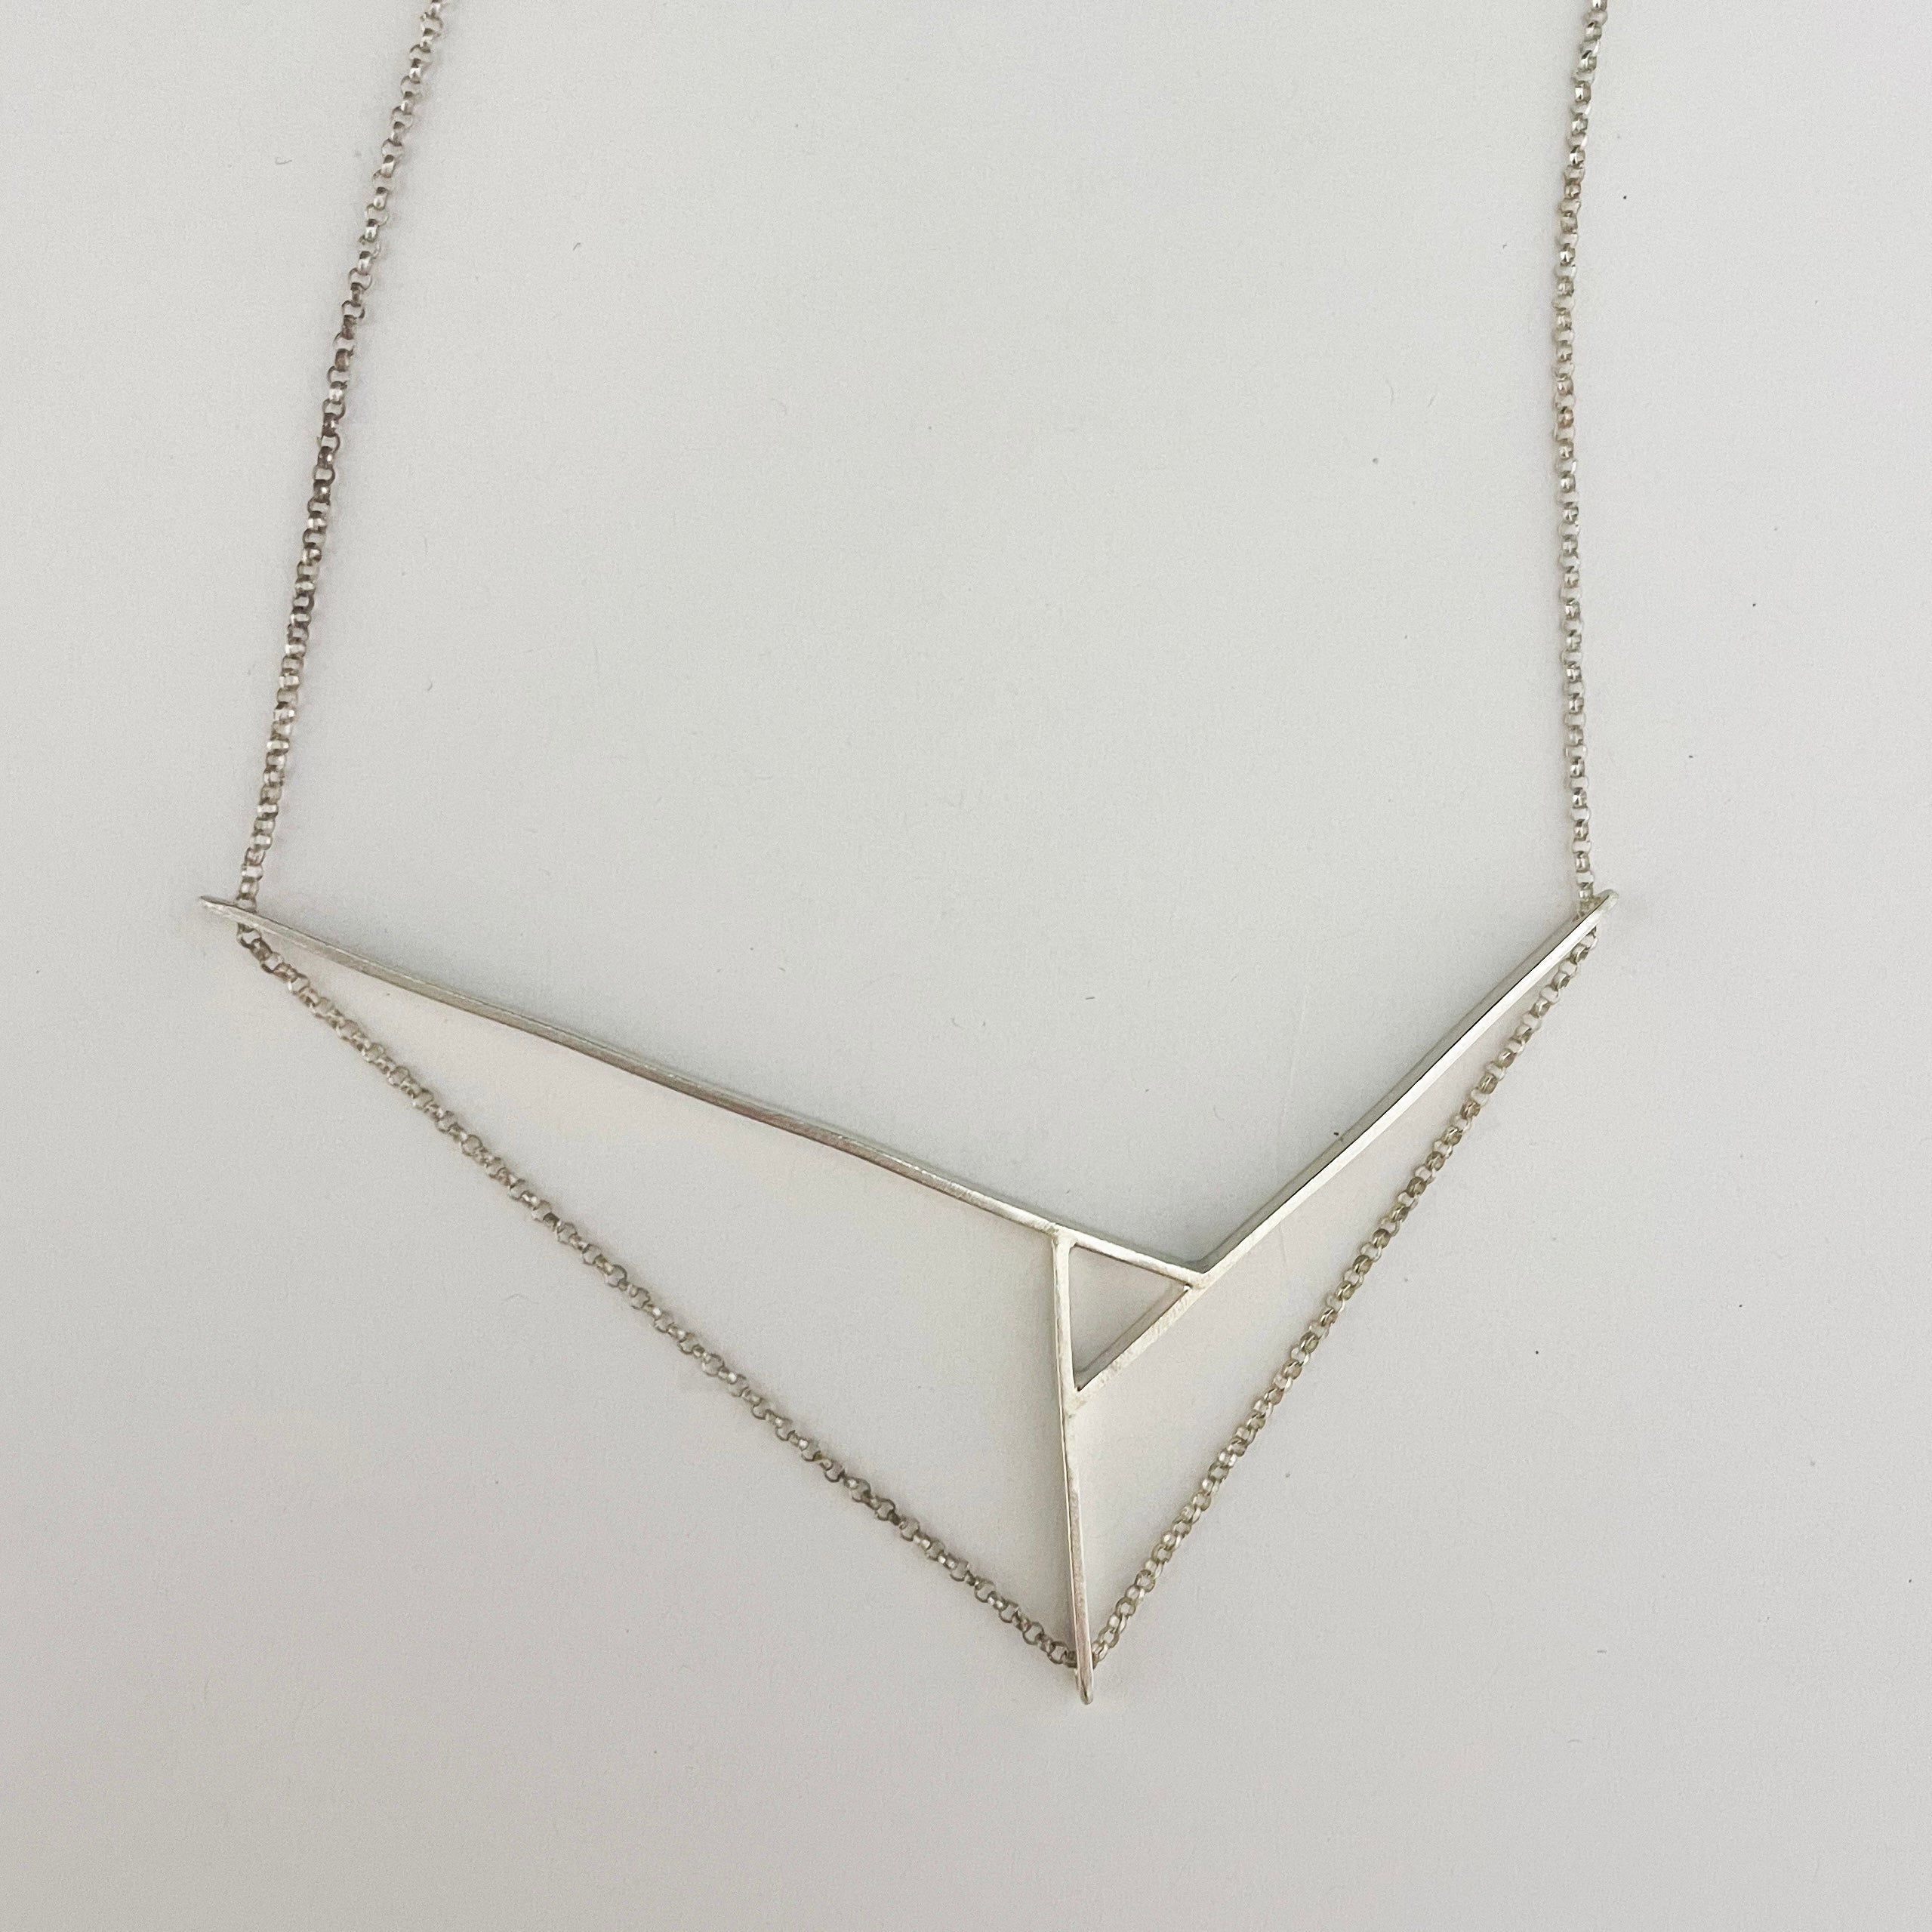 ORIGAMI NECKLACE